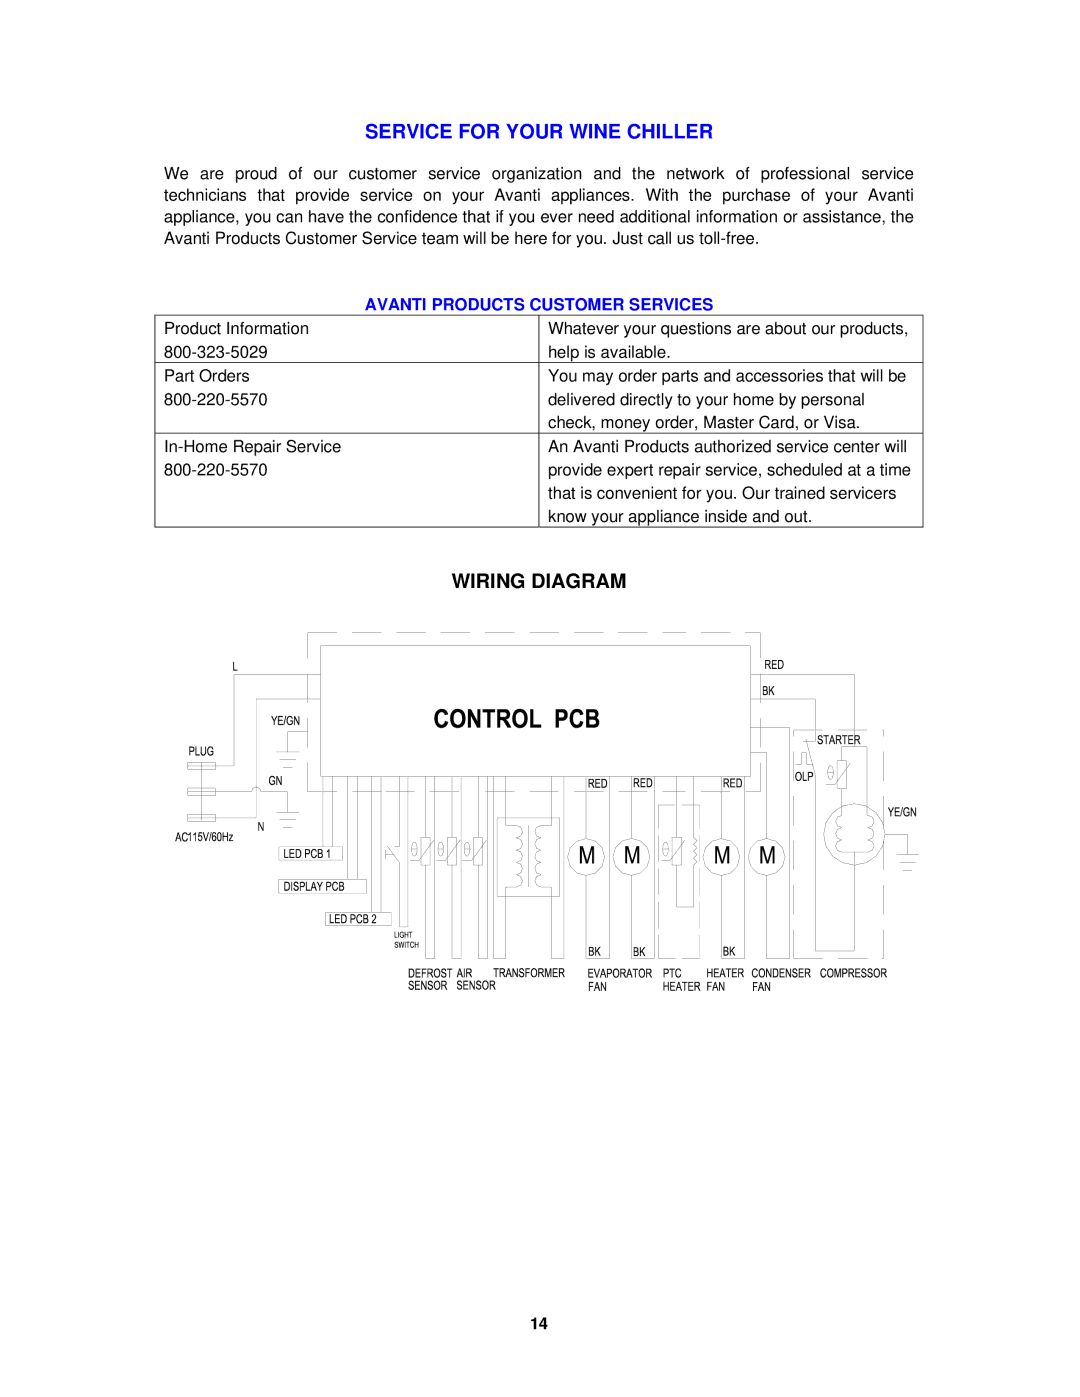 Avanti WCR5450DZ instruction manual Service for Your Wine Chiller, Wiring Diagram 